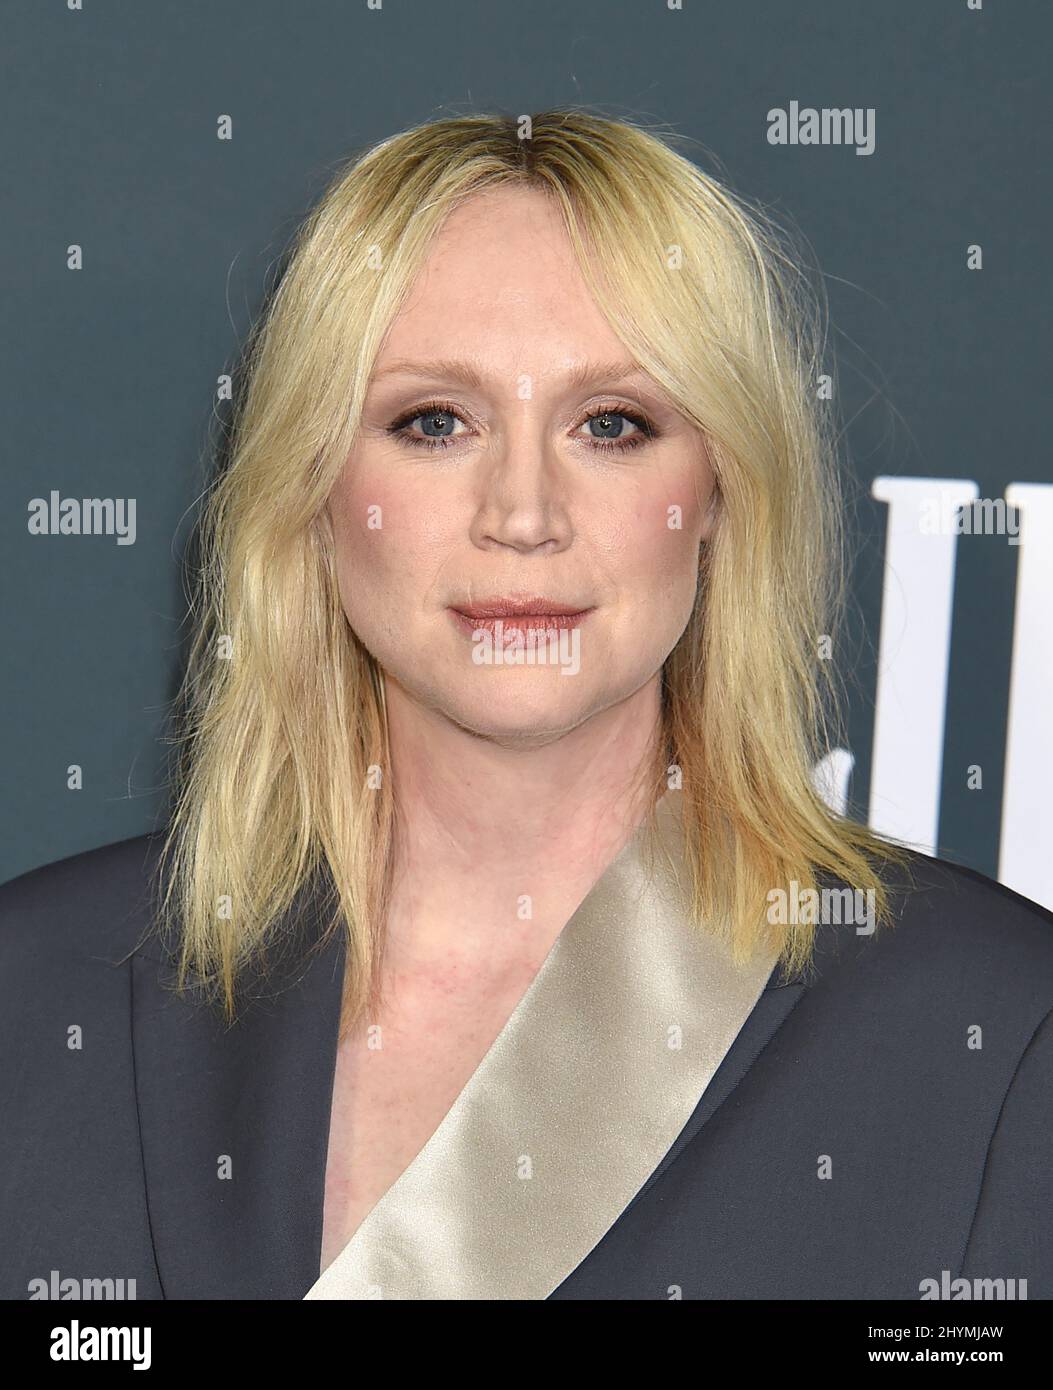 Gwendoline Christie at the 25th Annual Critics' Choice Awards held at Barker Hanger on January 12, 2020 in Santa Monica, CA. Stock Photo